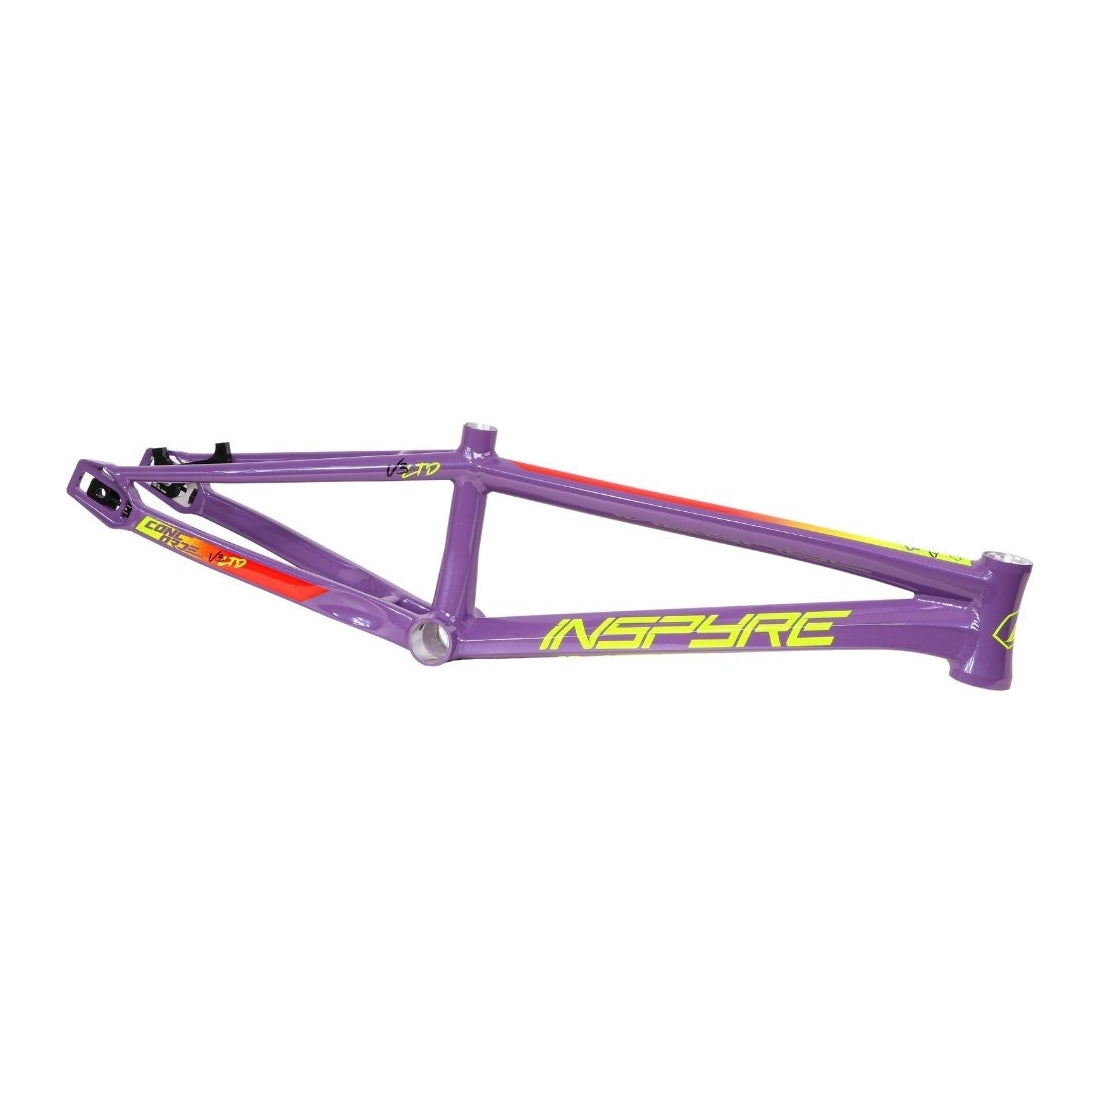 Purple Inspyre Concorde V3 Junior Frame BMX bicycle frame with branding on a white background.